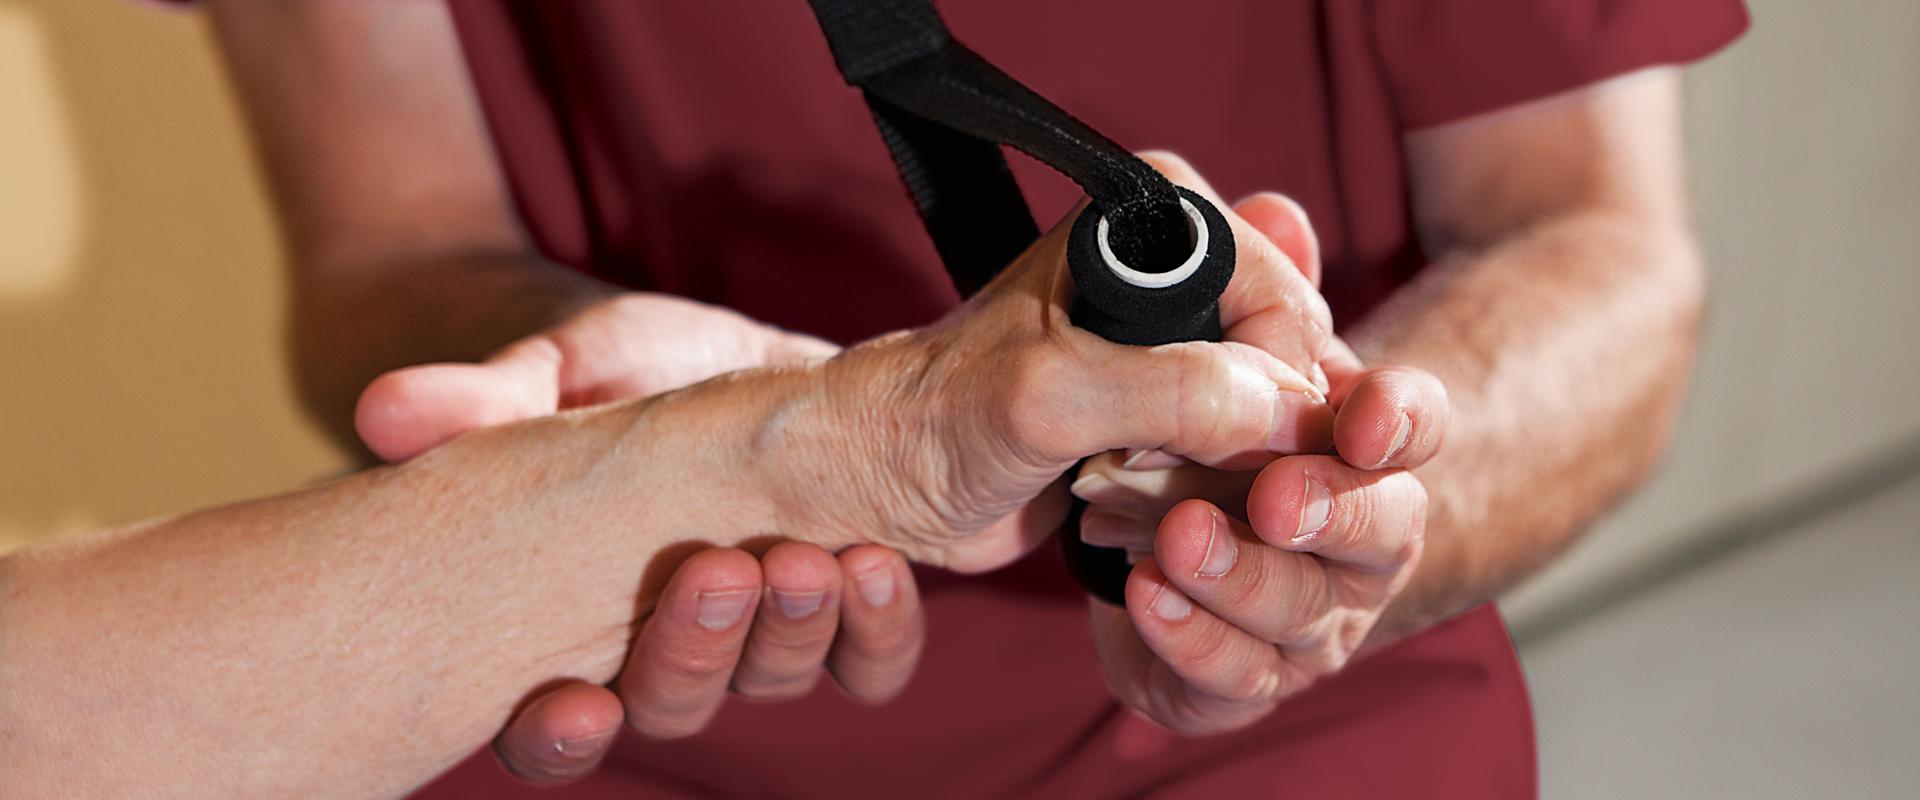 therapist and patients hands performing therapy exercise